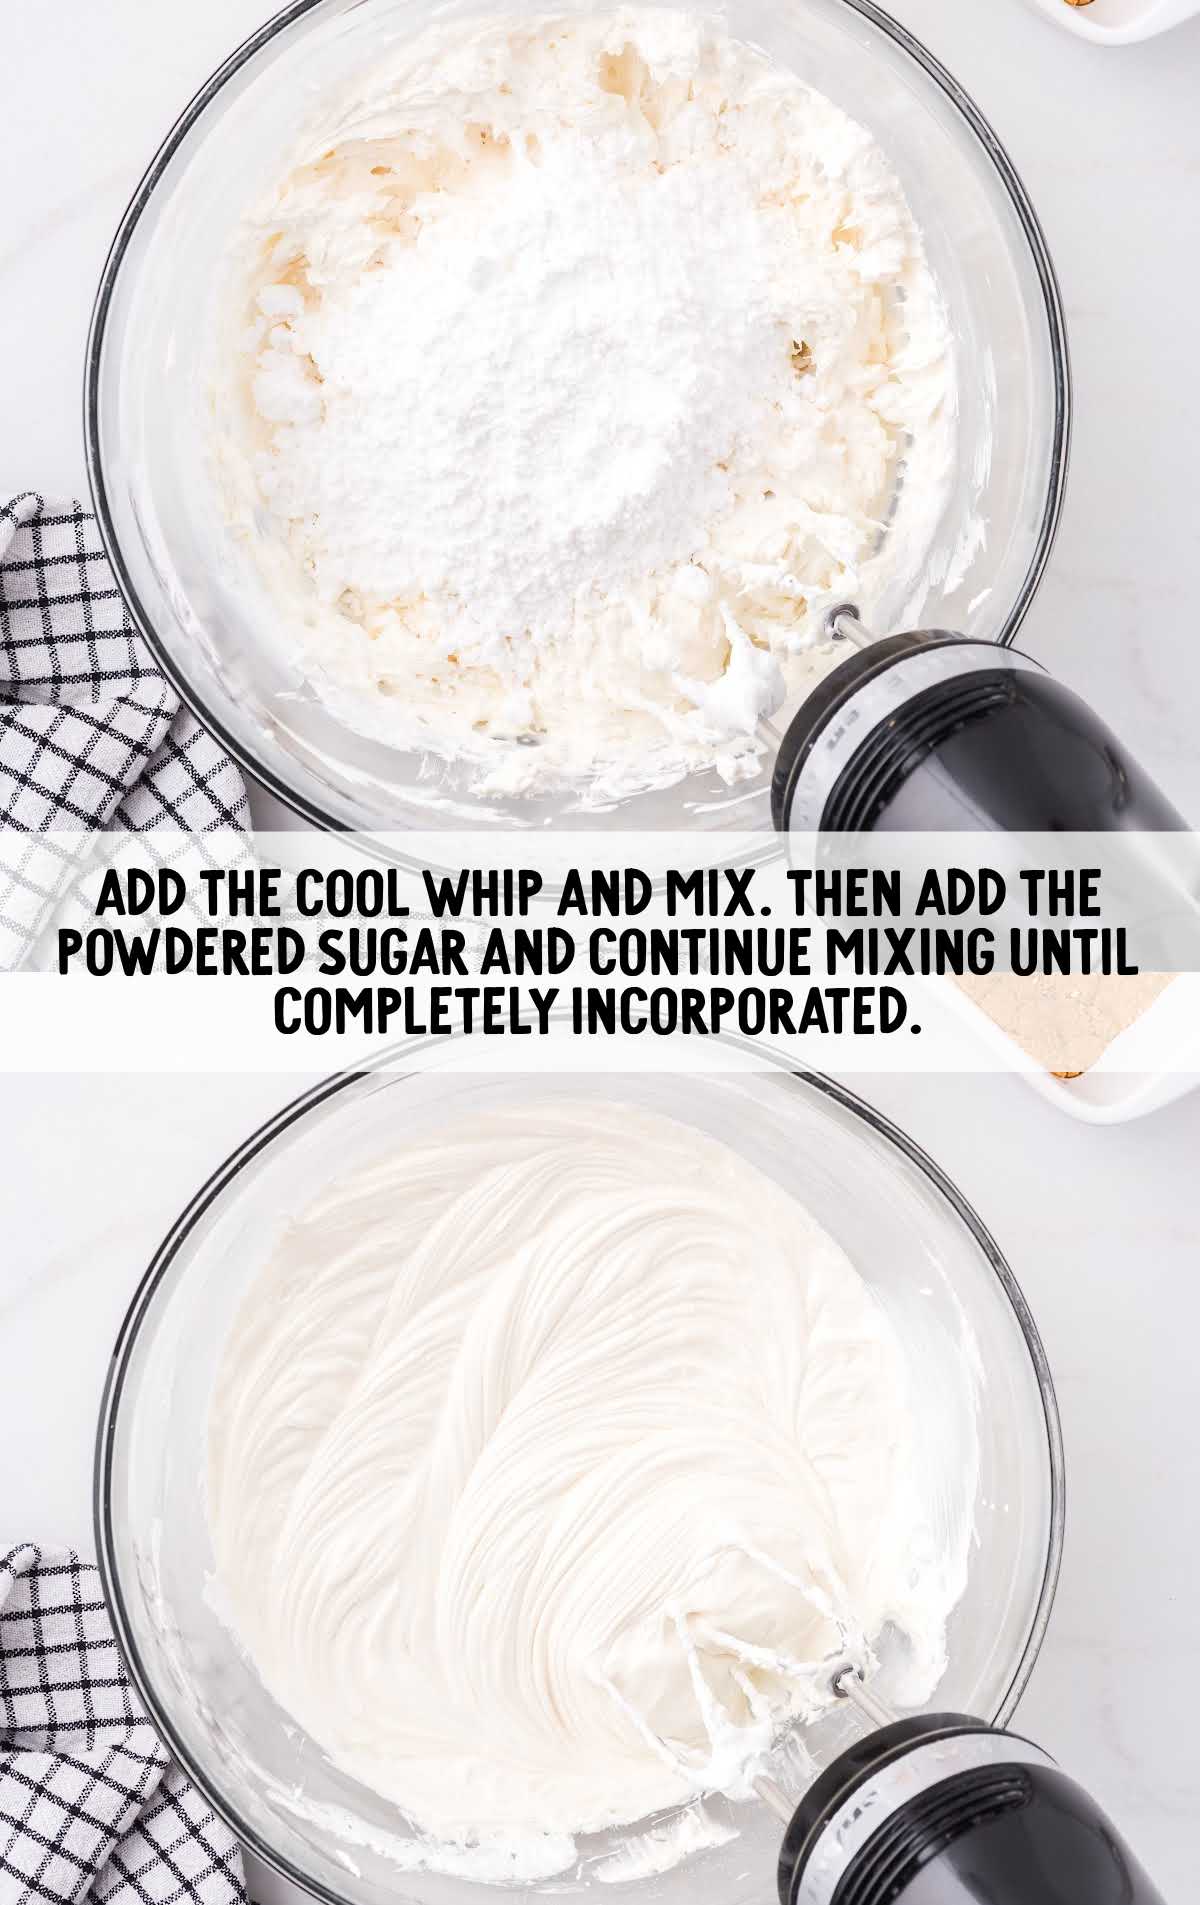 cool whip and powered sugar whisked into the cream cheese mixture